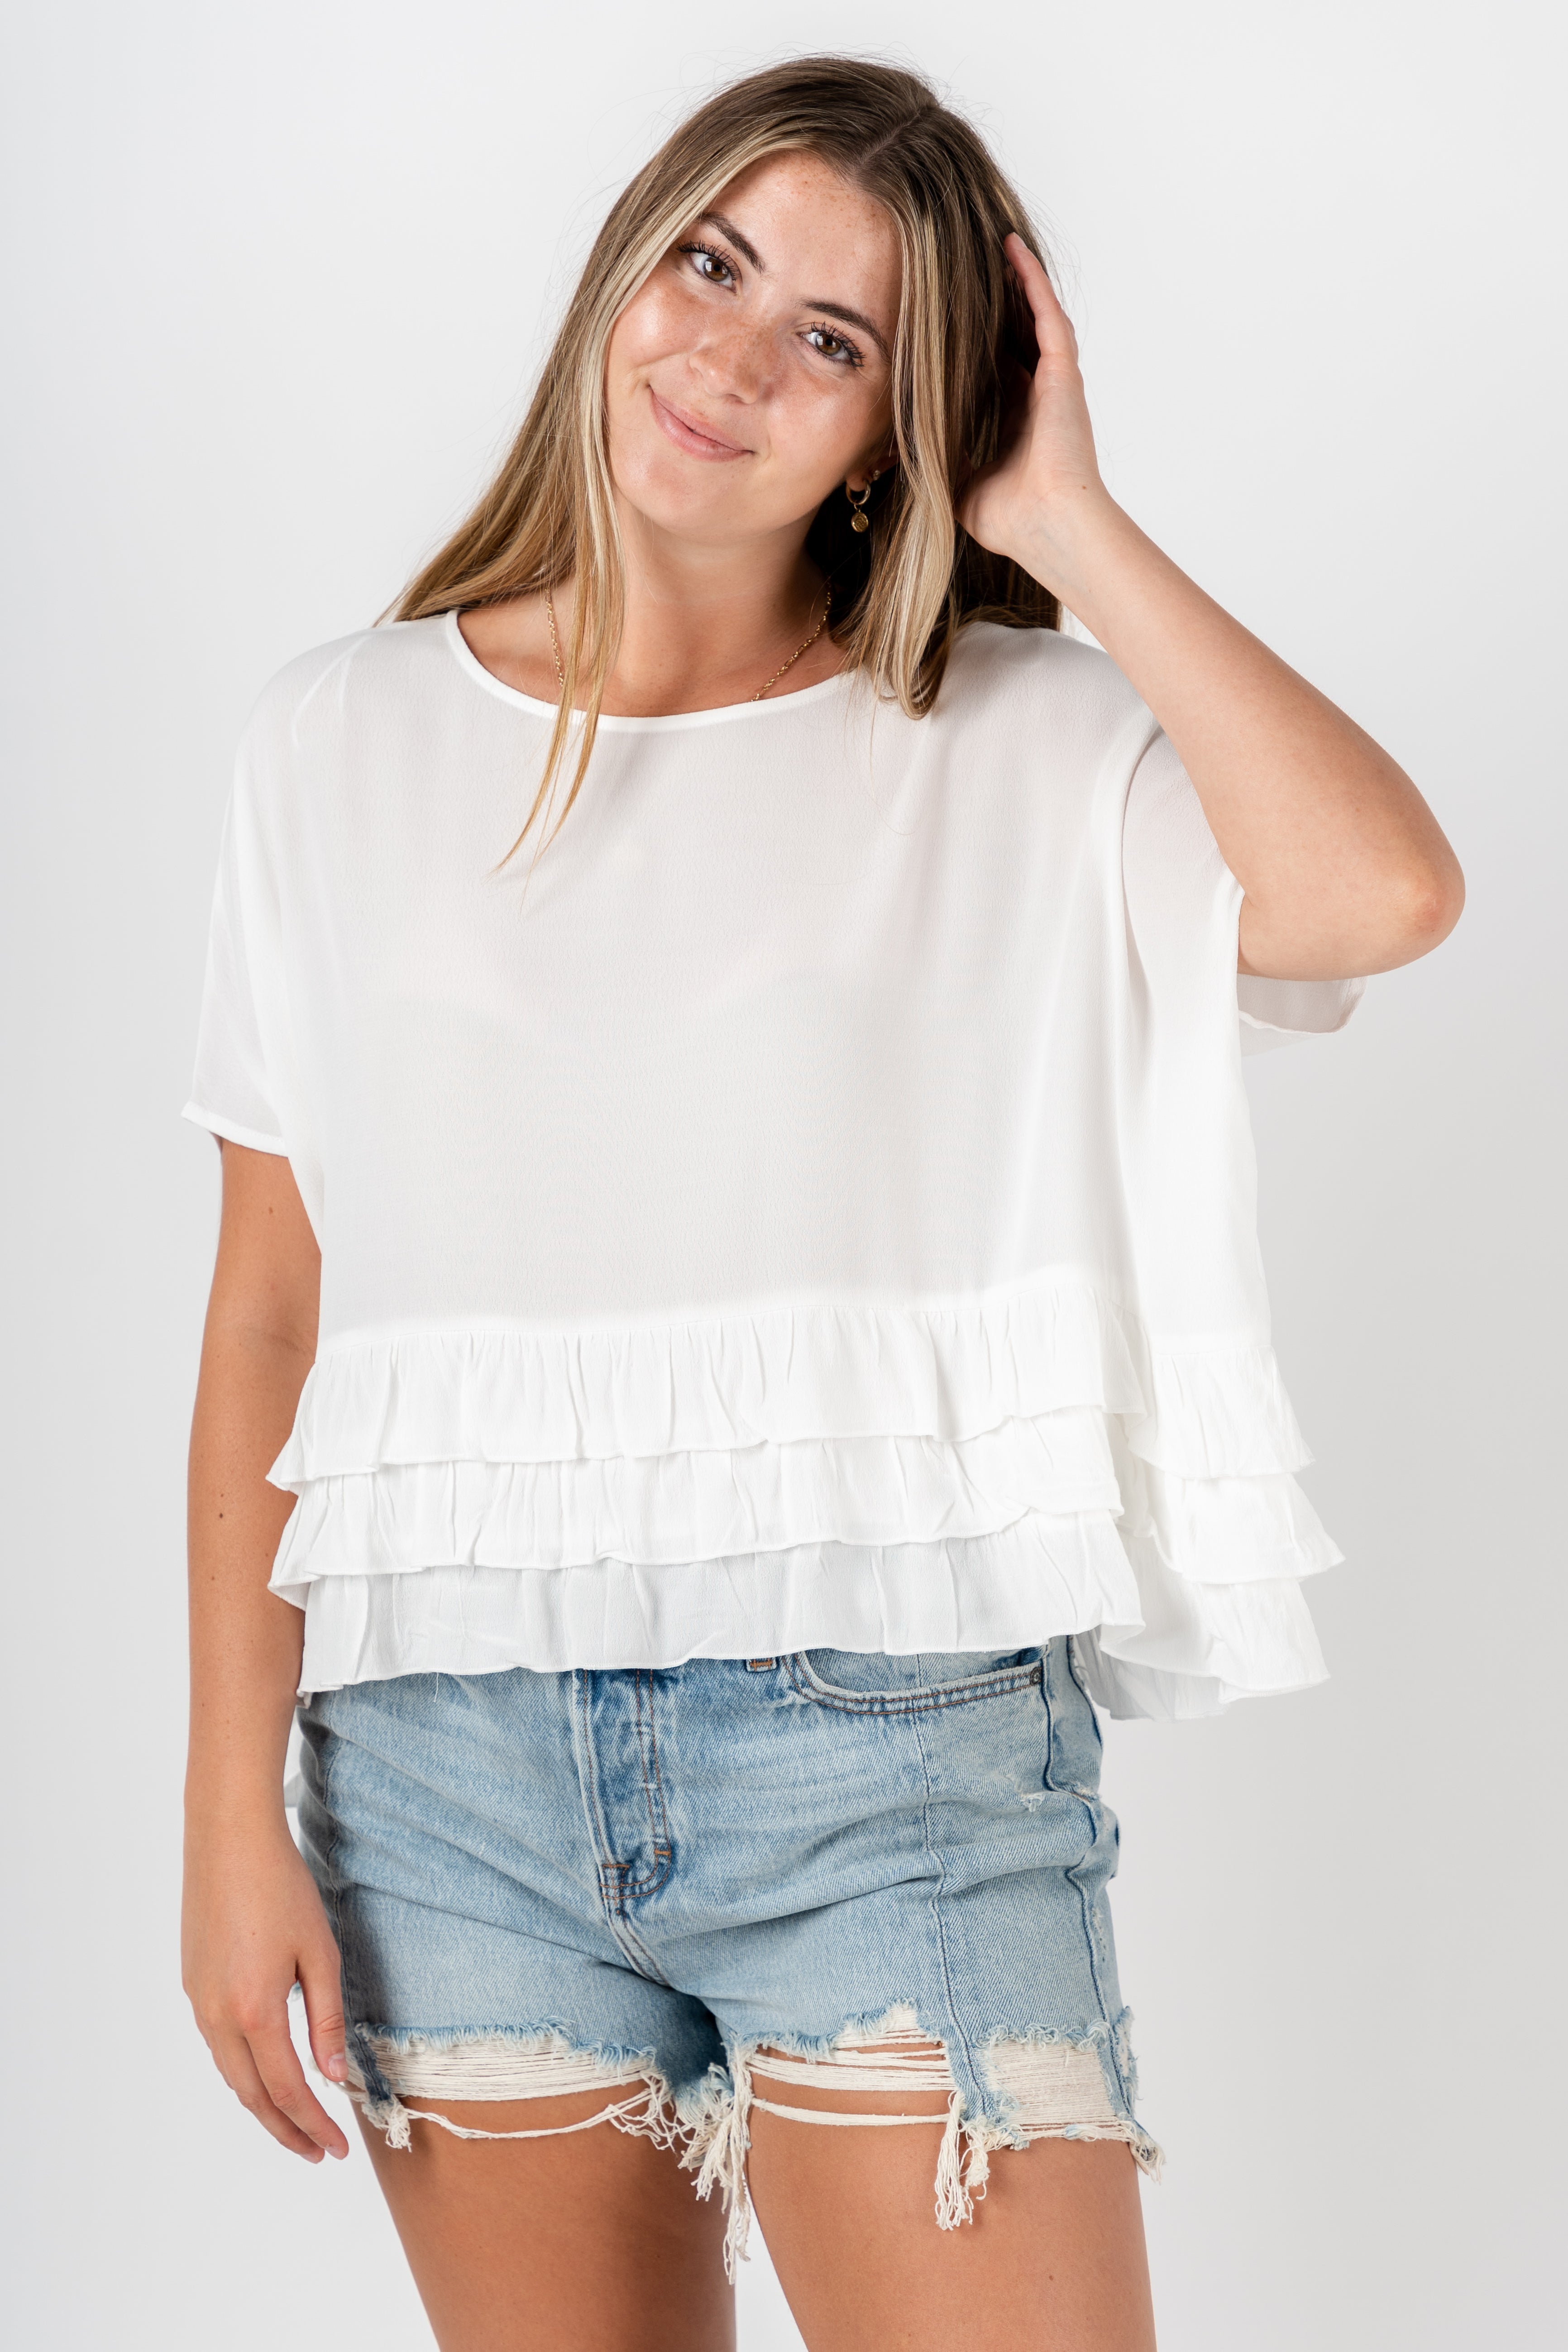 Tops - Blouses, Tanks, Z Supply tops, Piko tops Page 5 - Lush Fashion ...